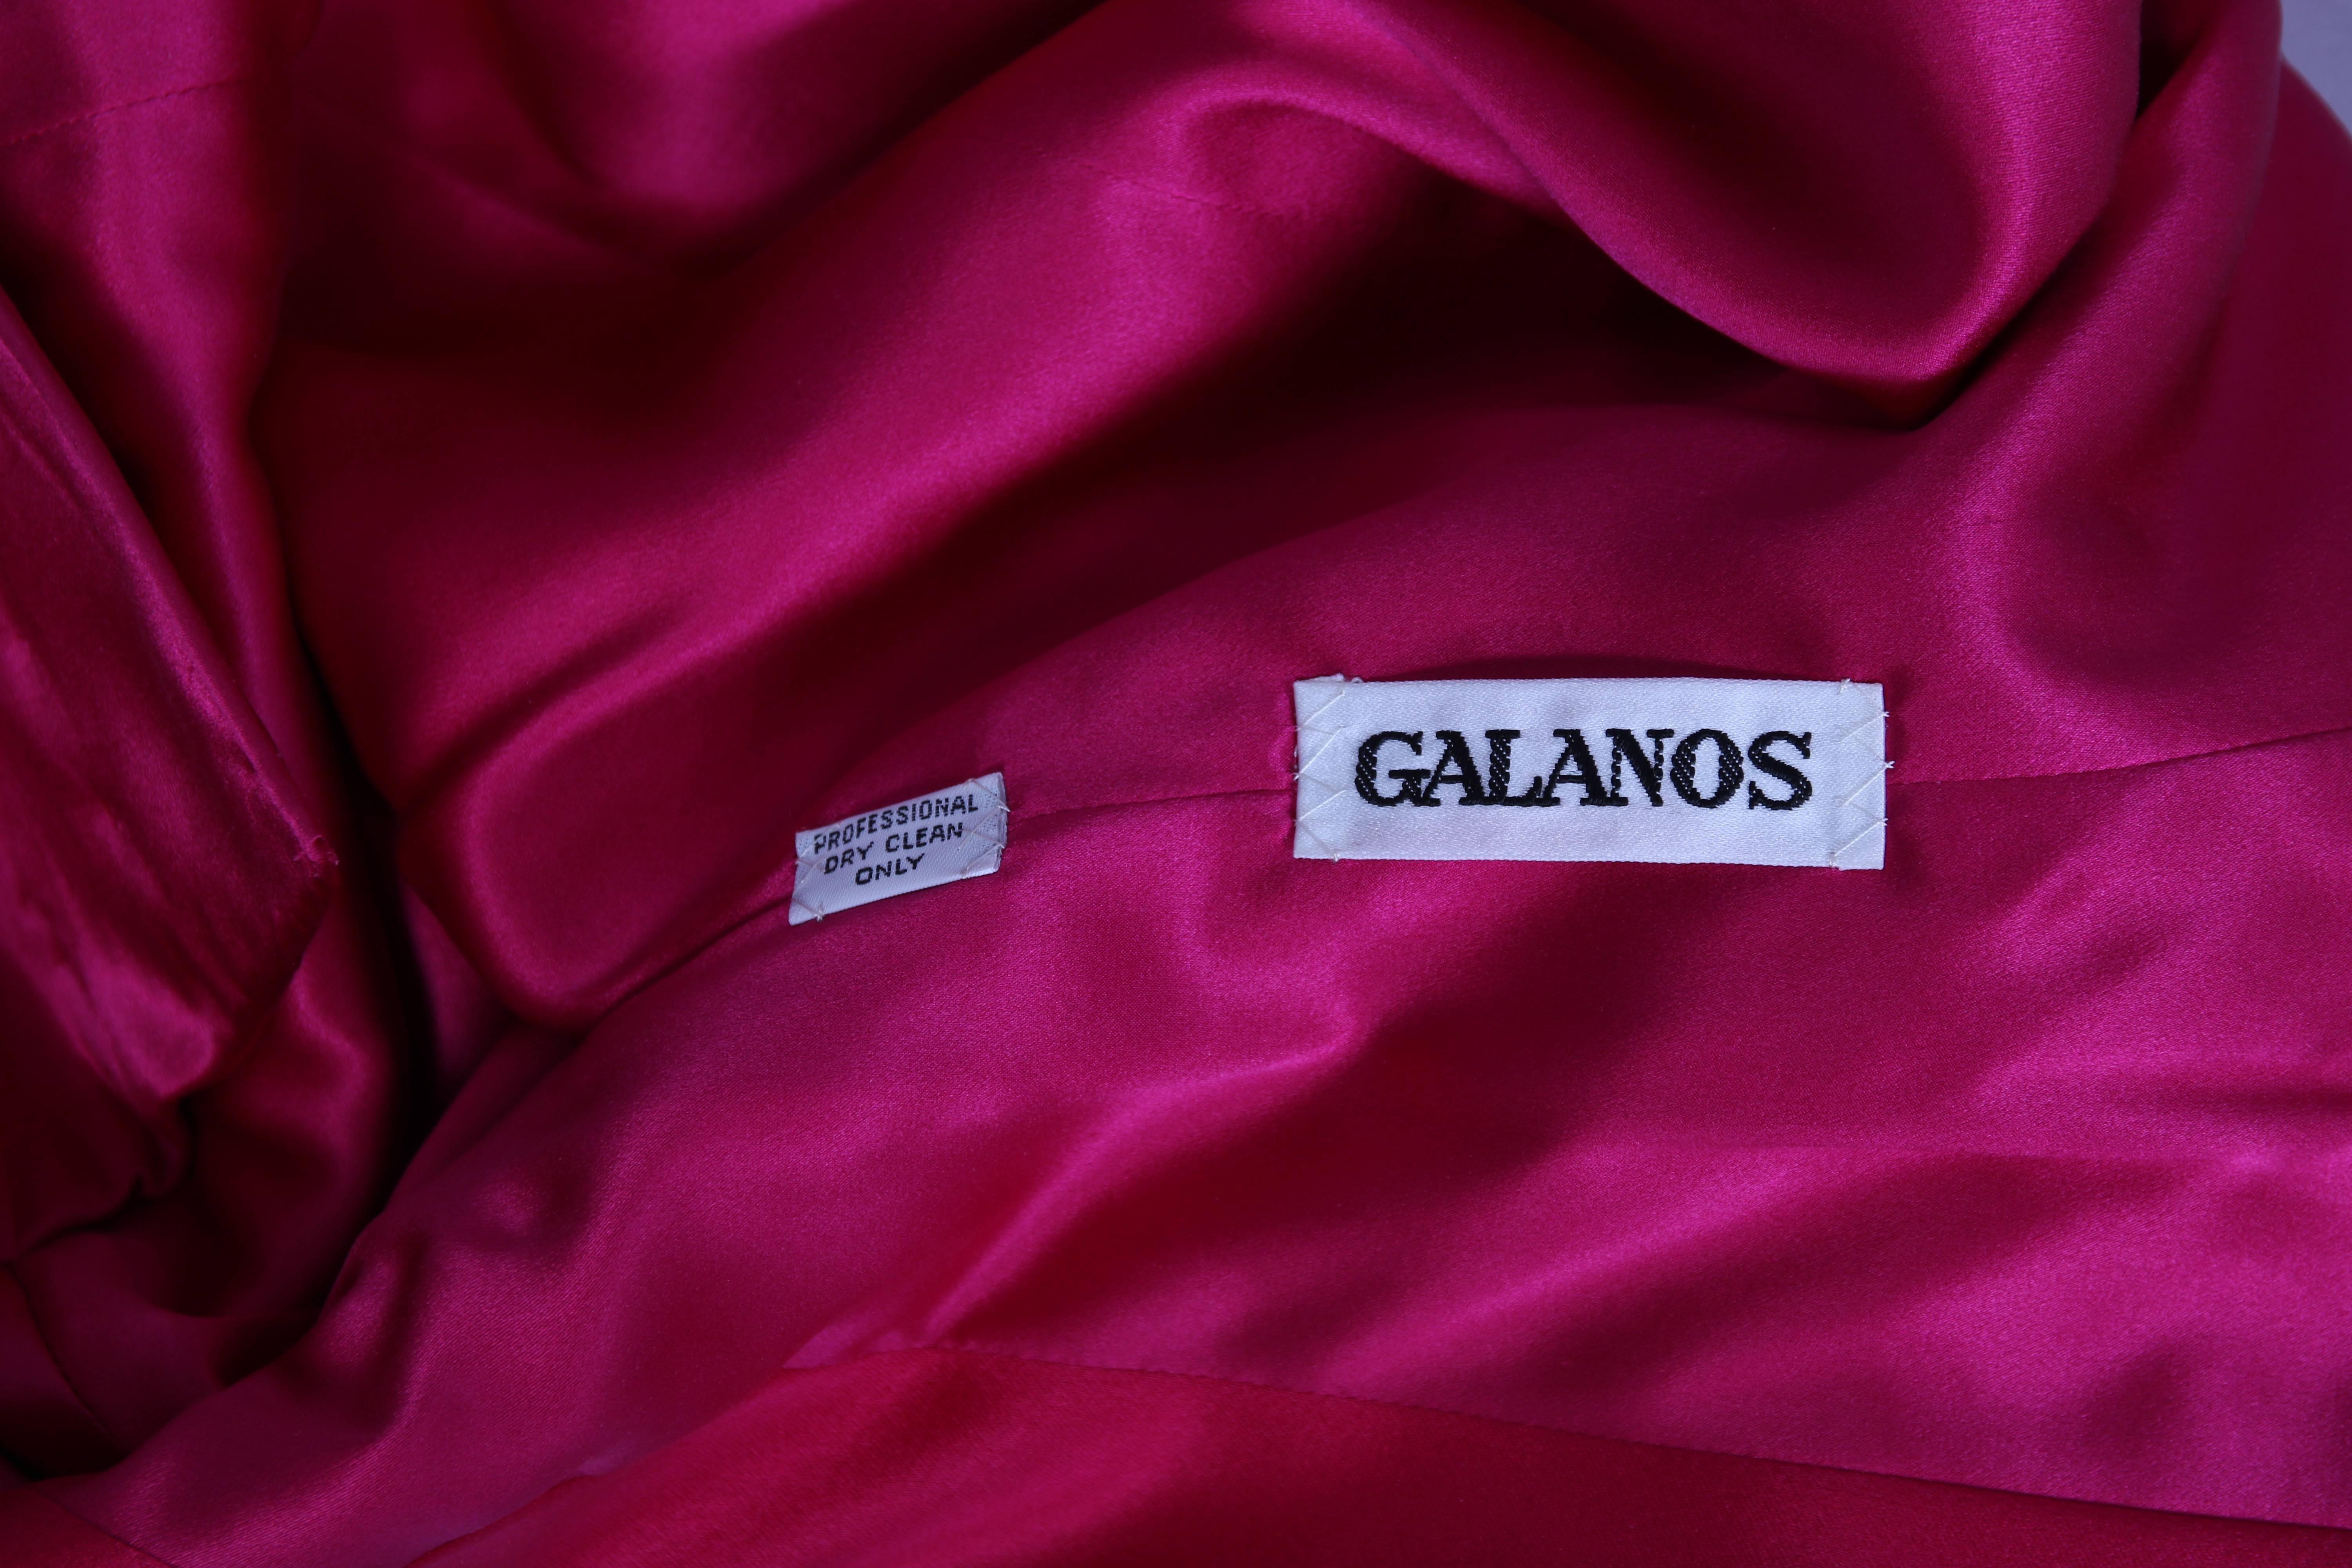 Vintage Galanos Hot Pink Satin Jacket Blouse In Excellent Condition For Sale In Studio City, CA